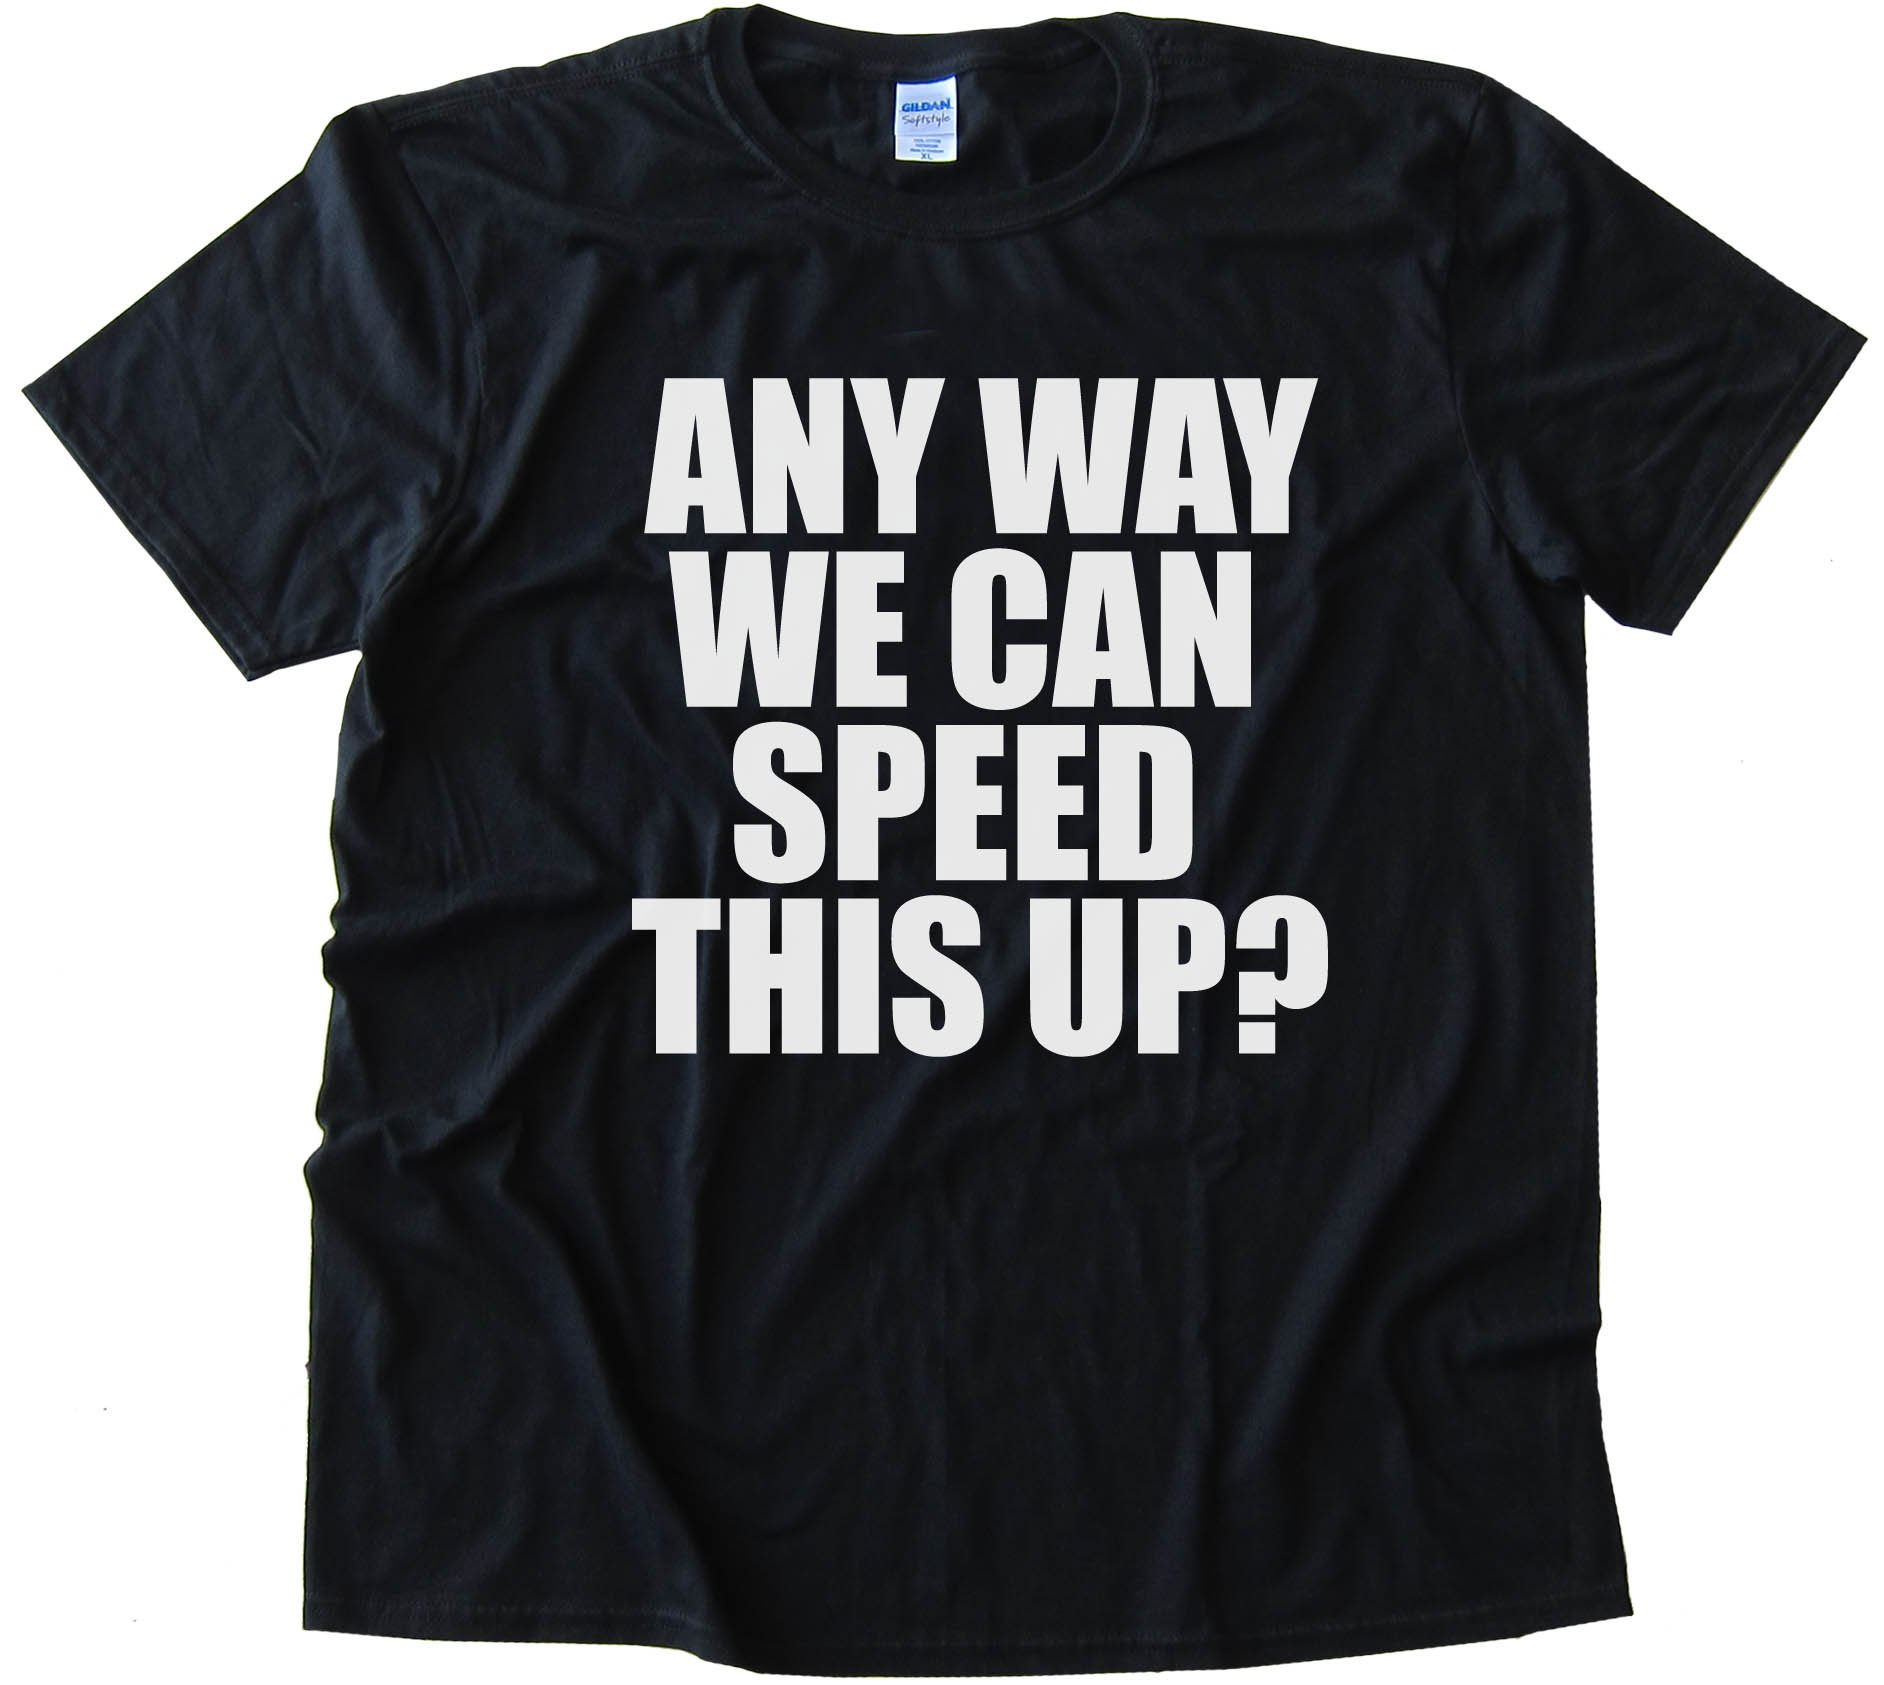 Any Way We Can Speed This Up? - Tee Shirt